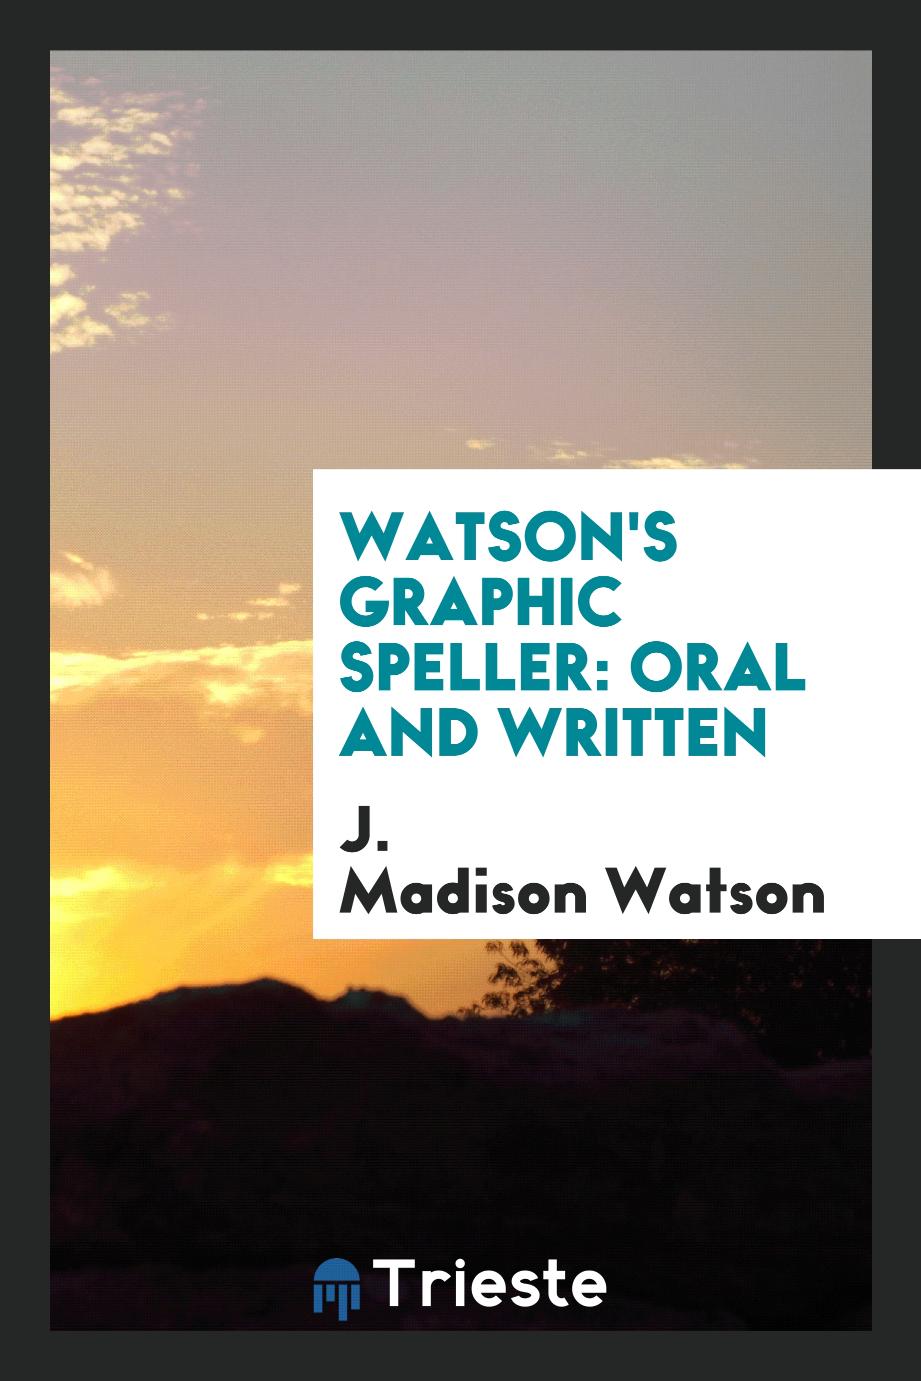 Watson's Graphic Speller: Oral and Written